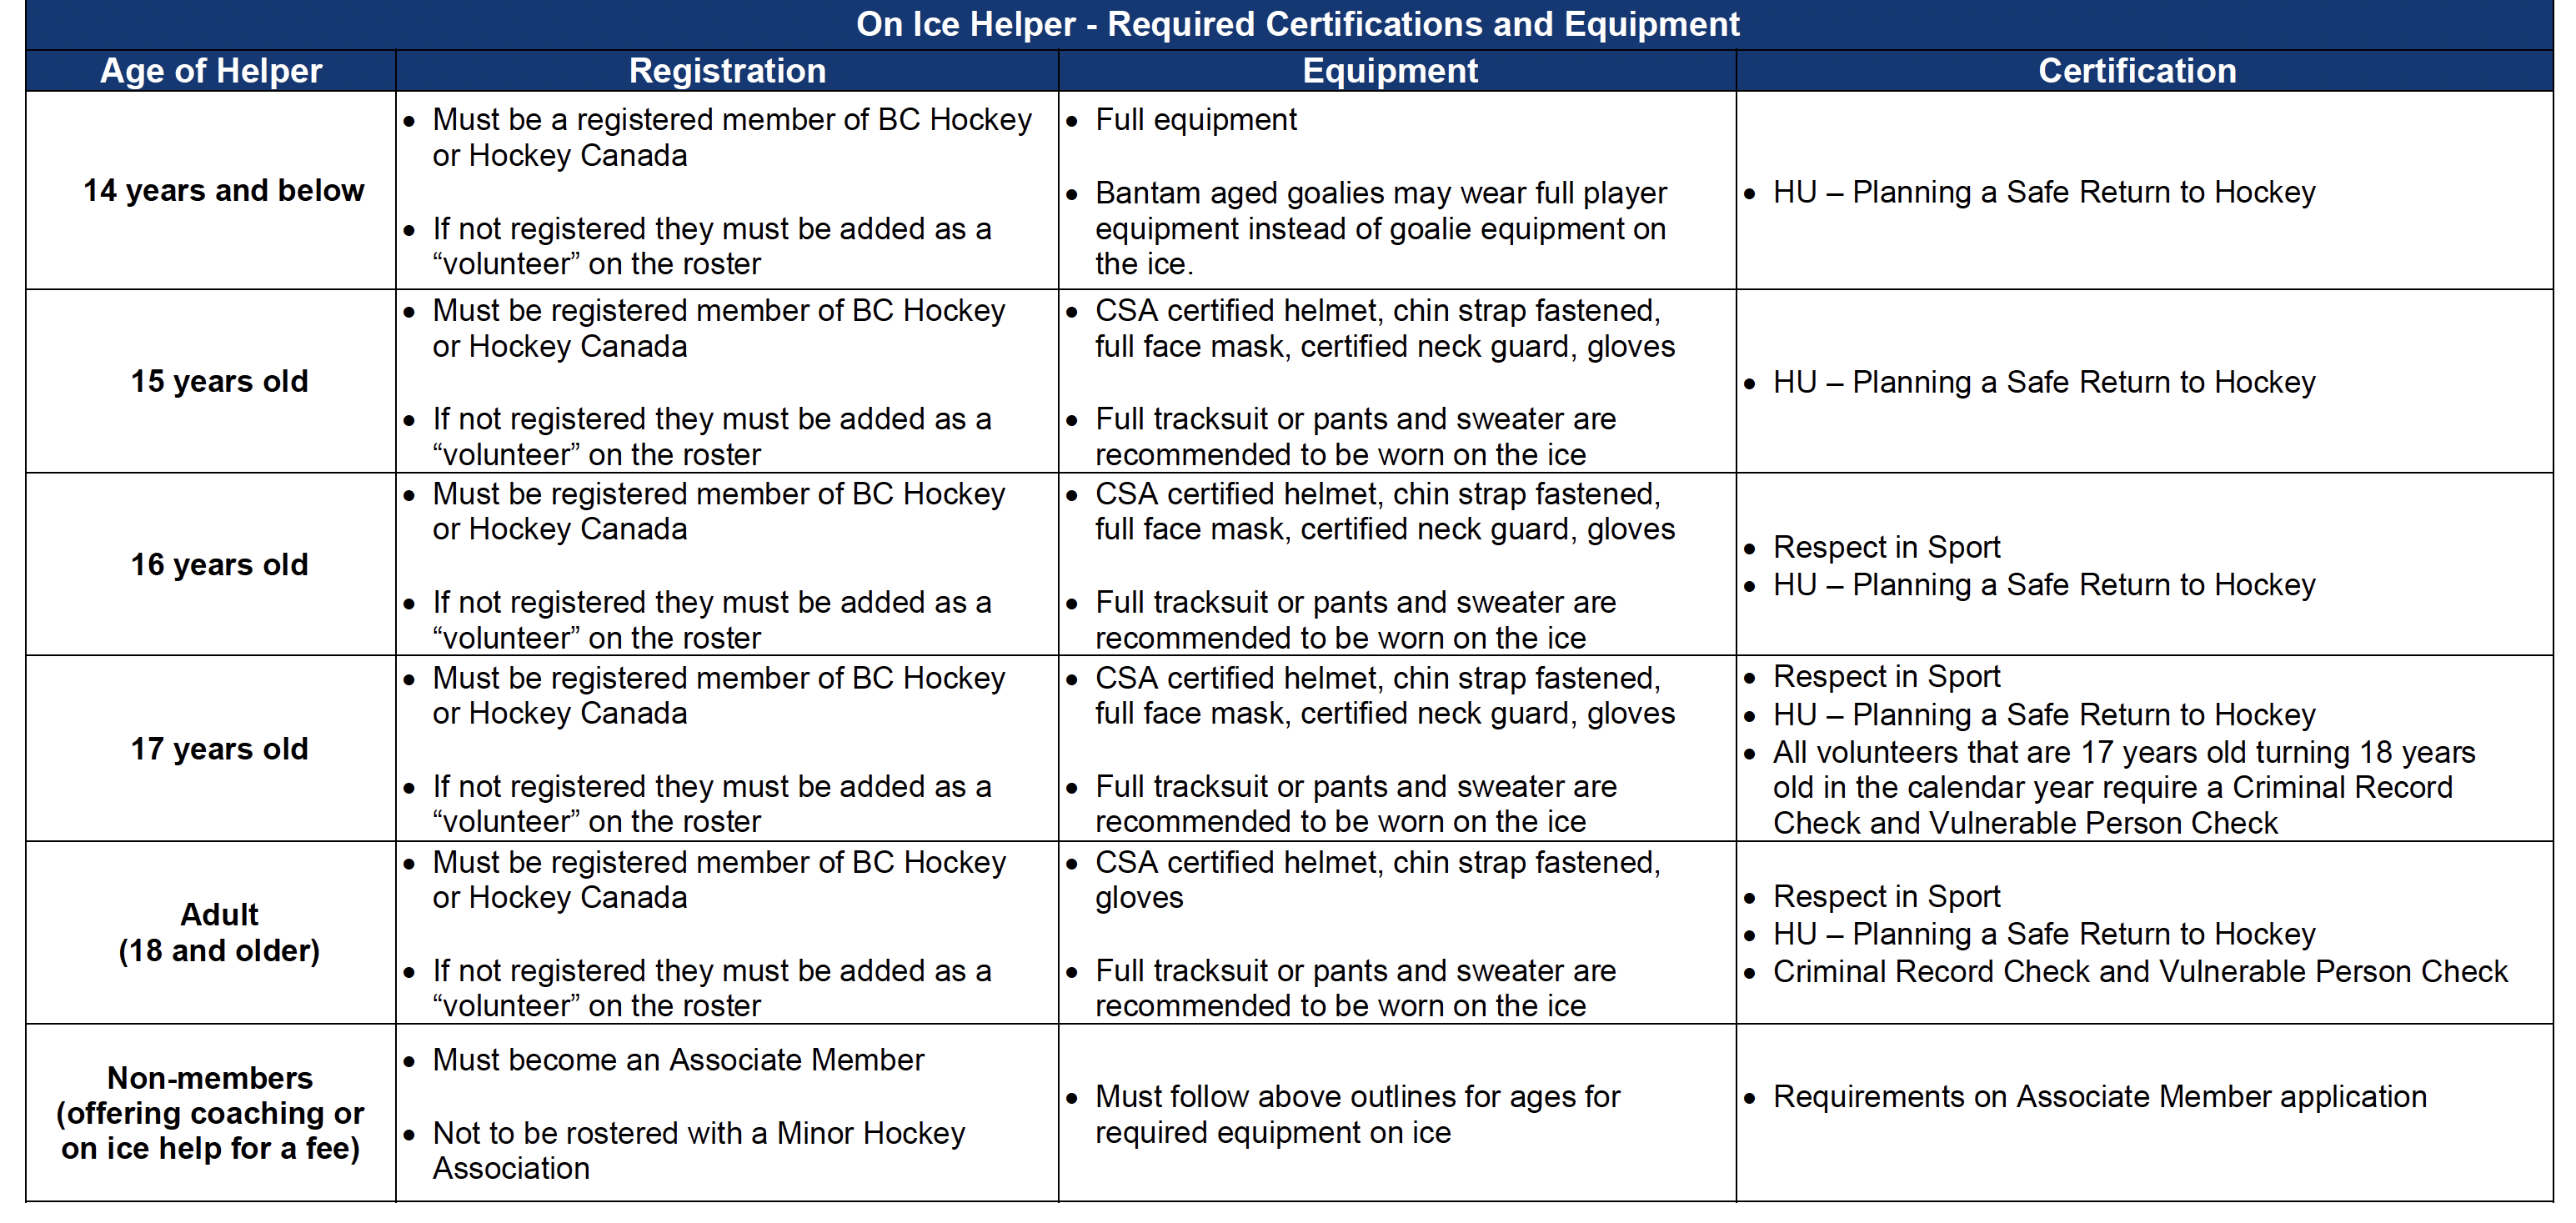 On Ice Helpers Requirements from BC Hockey